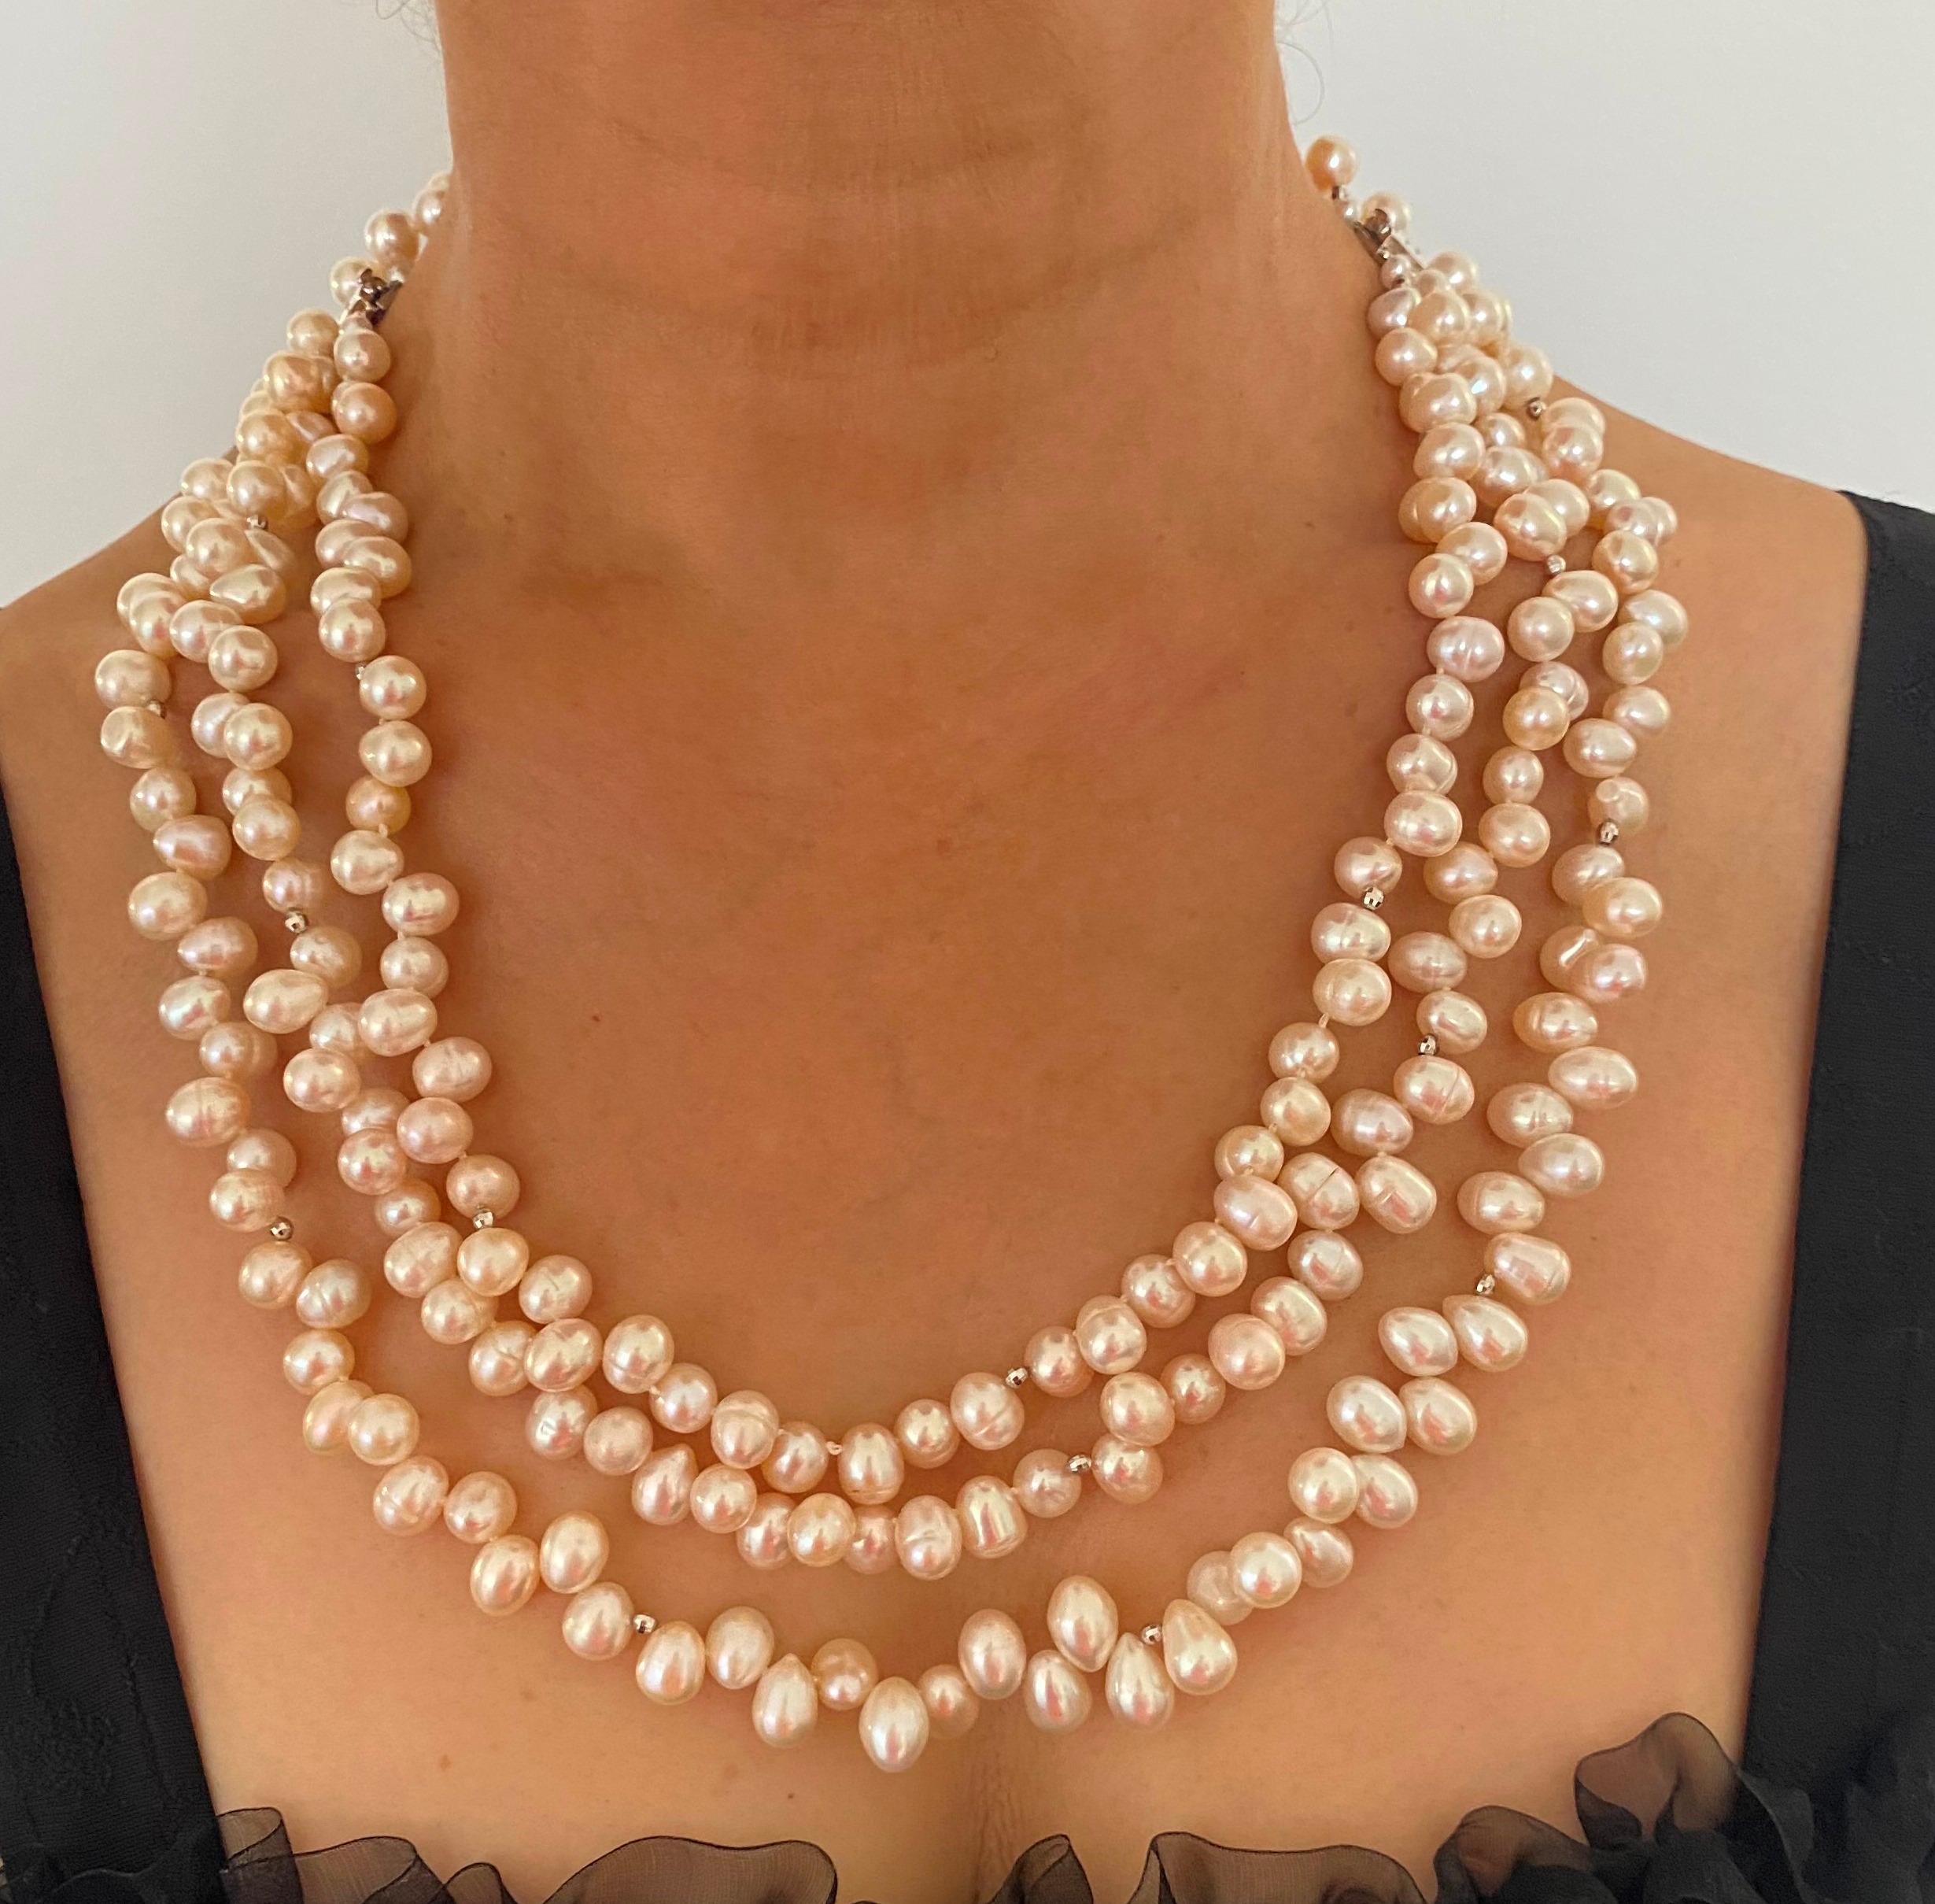 Artisan Marina J. Convertible Three in One All Pearl Necklace & Bracelet For Sale